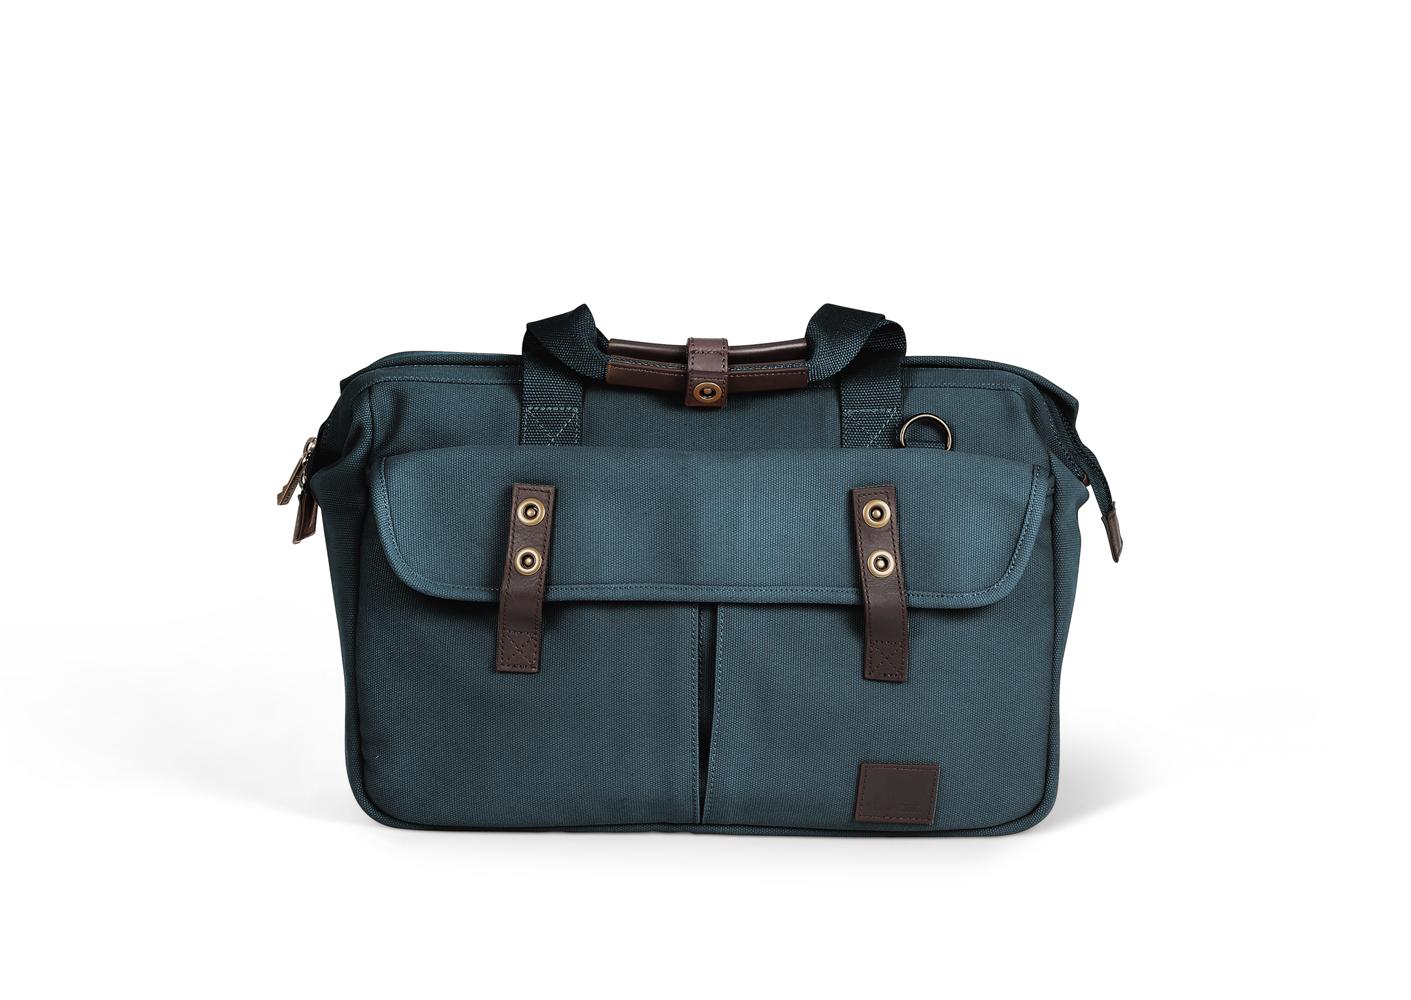 The Gladstone Bag by Millican